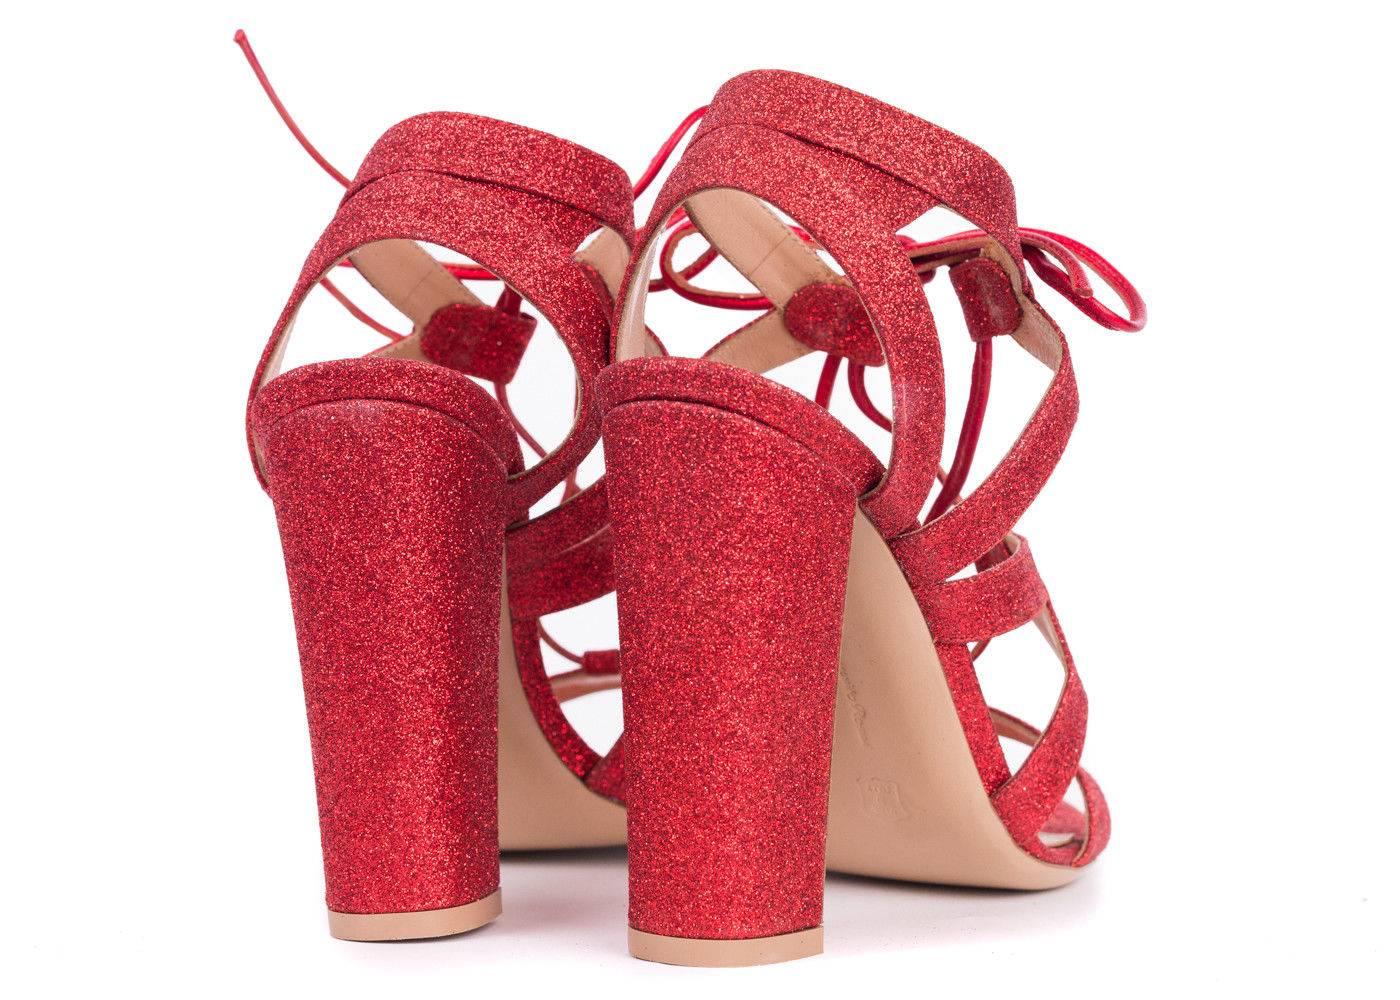 Gianvito Rossi Red Glitter Caged Lace Up Sandal Heels In New Condition For Sale In Brooklyn, NY